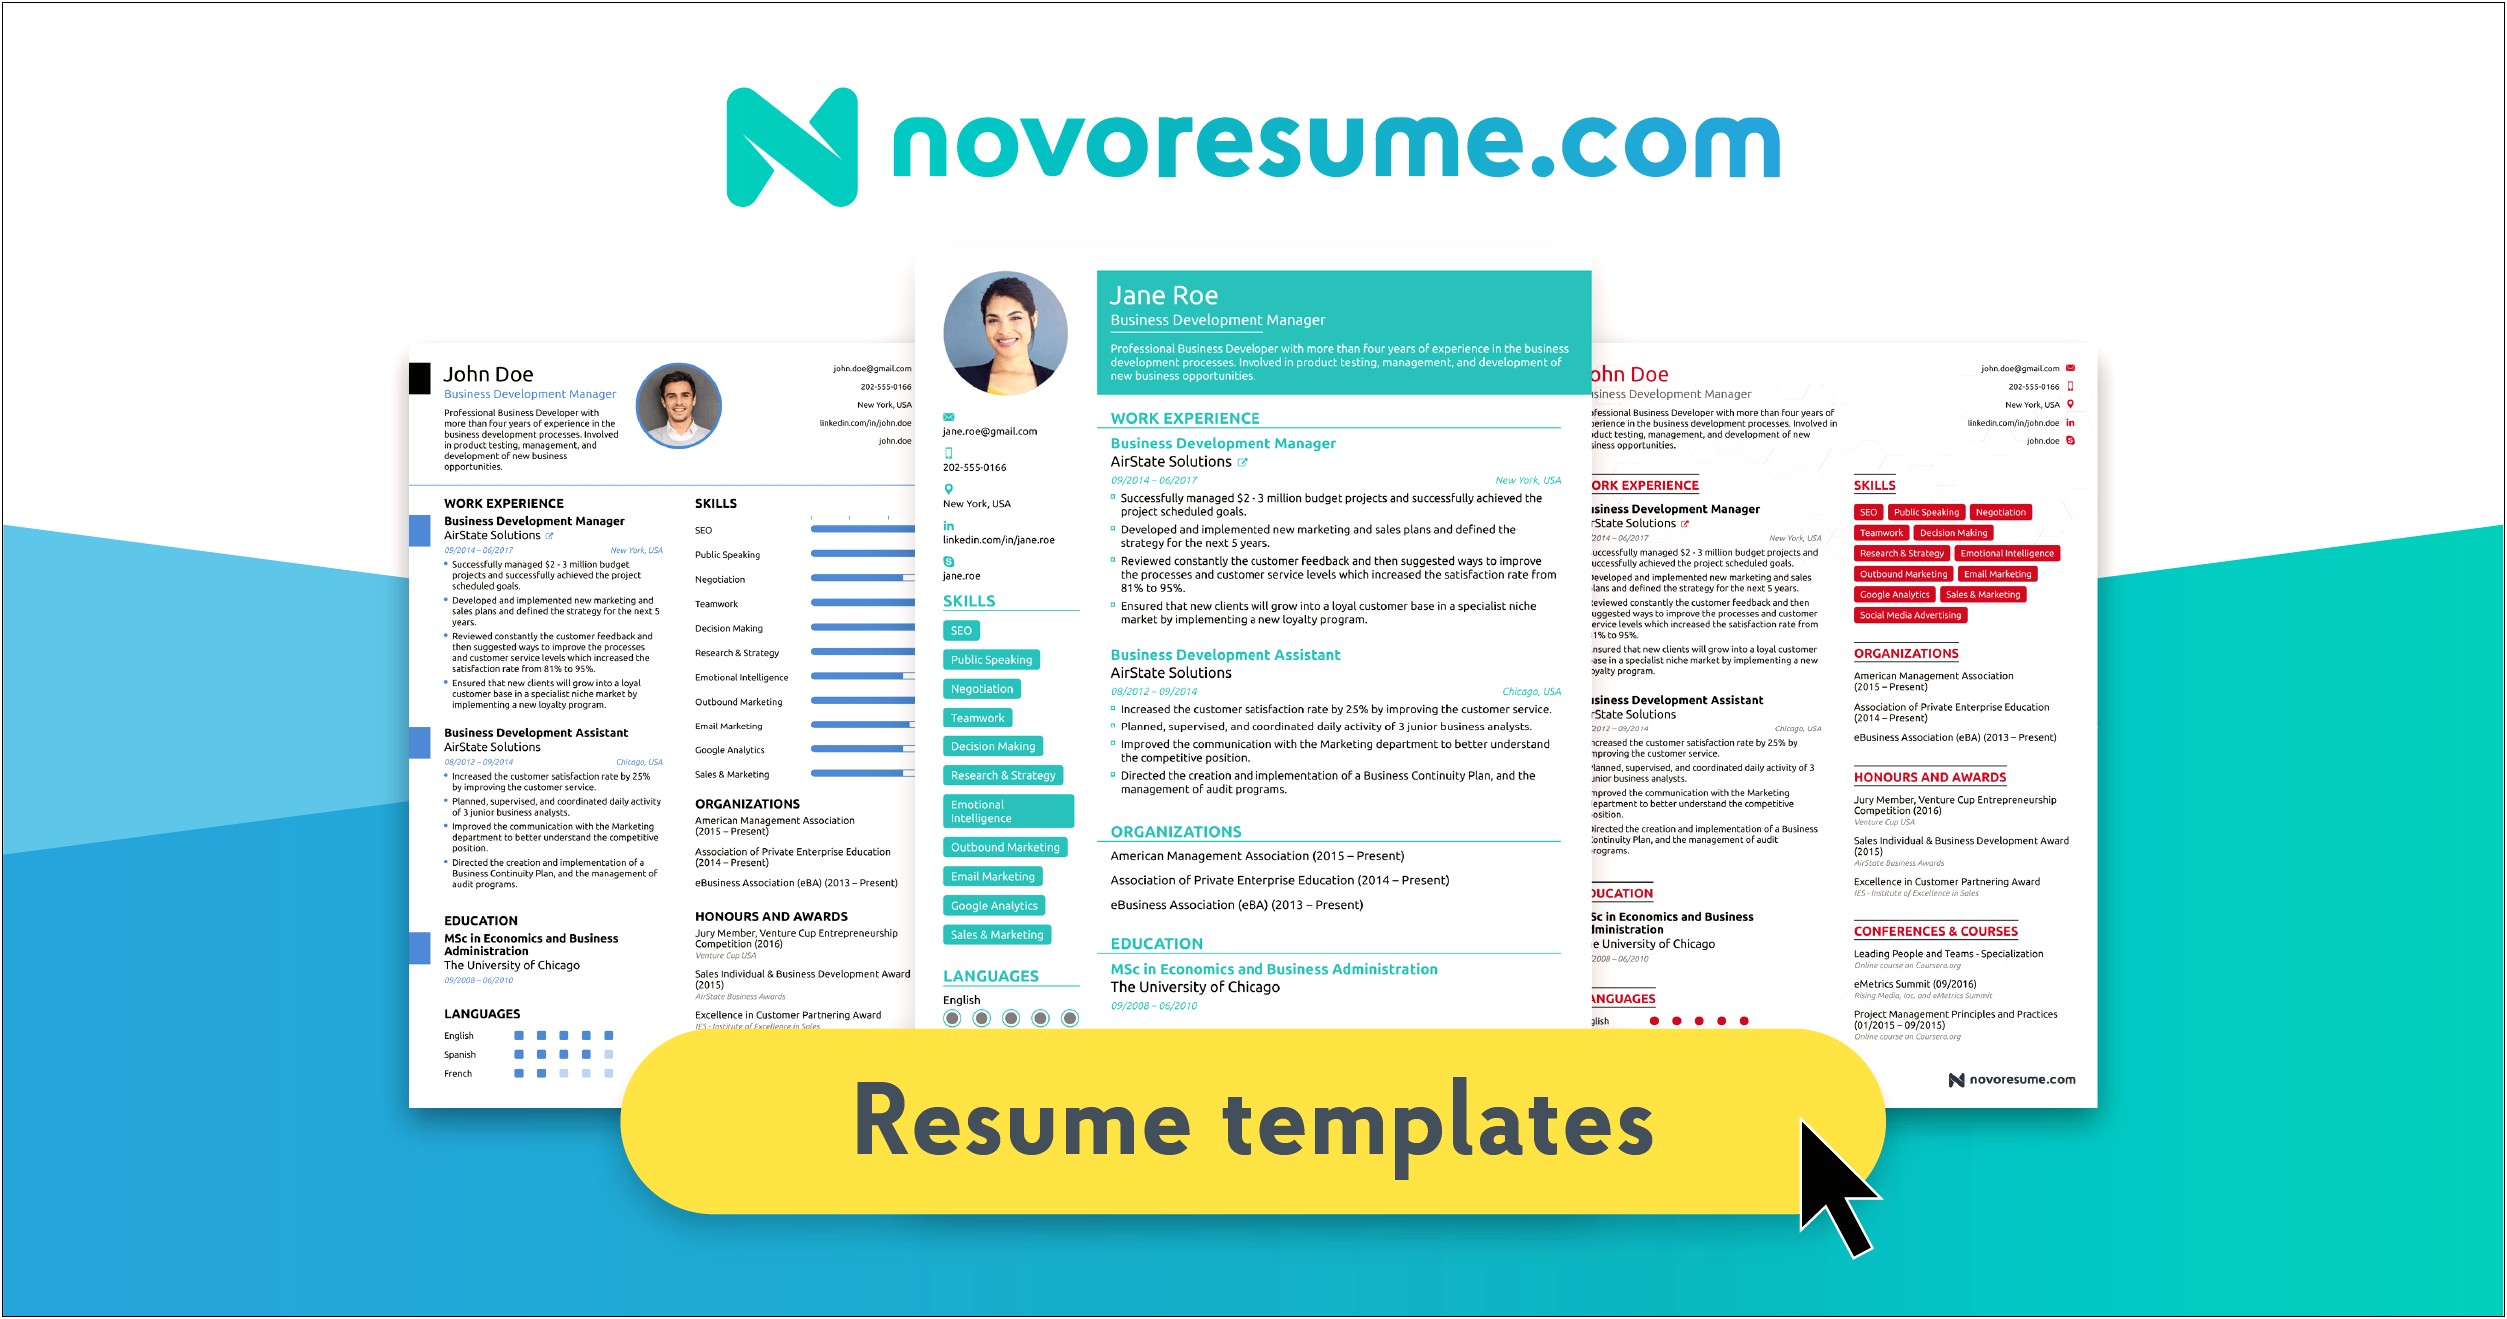 Free Resume Writing For Free By A Professional